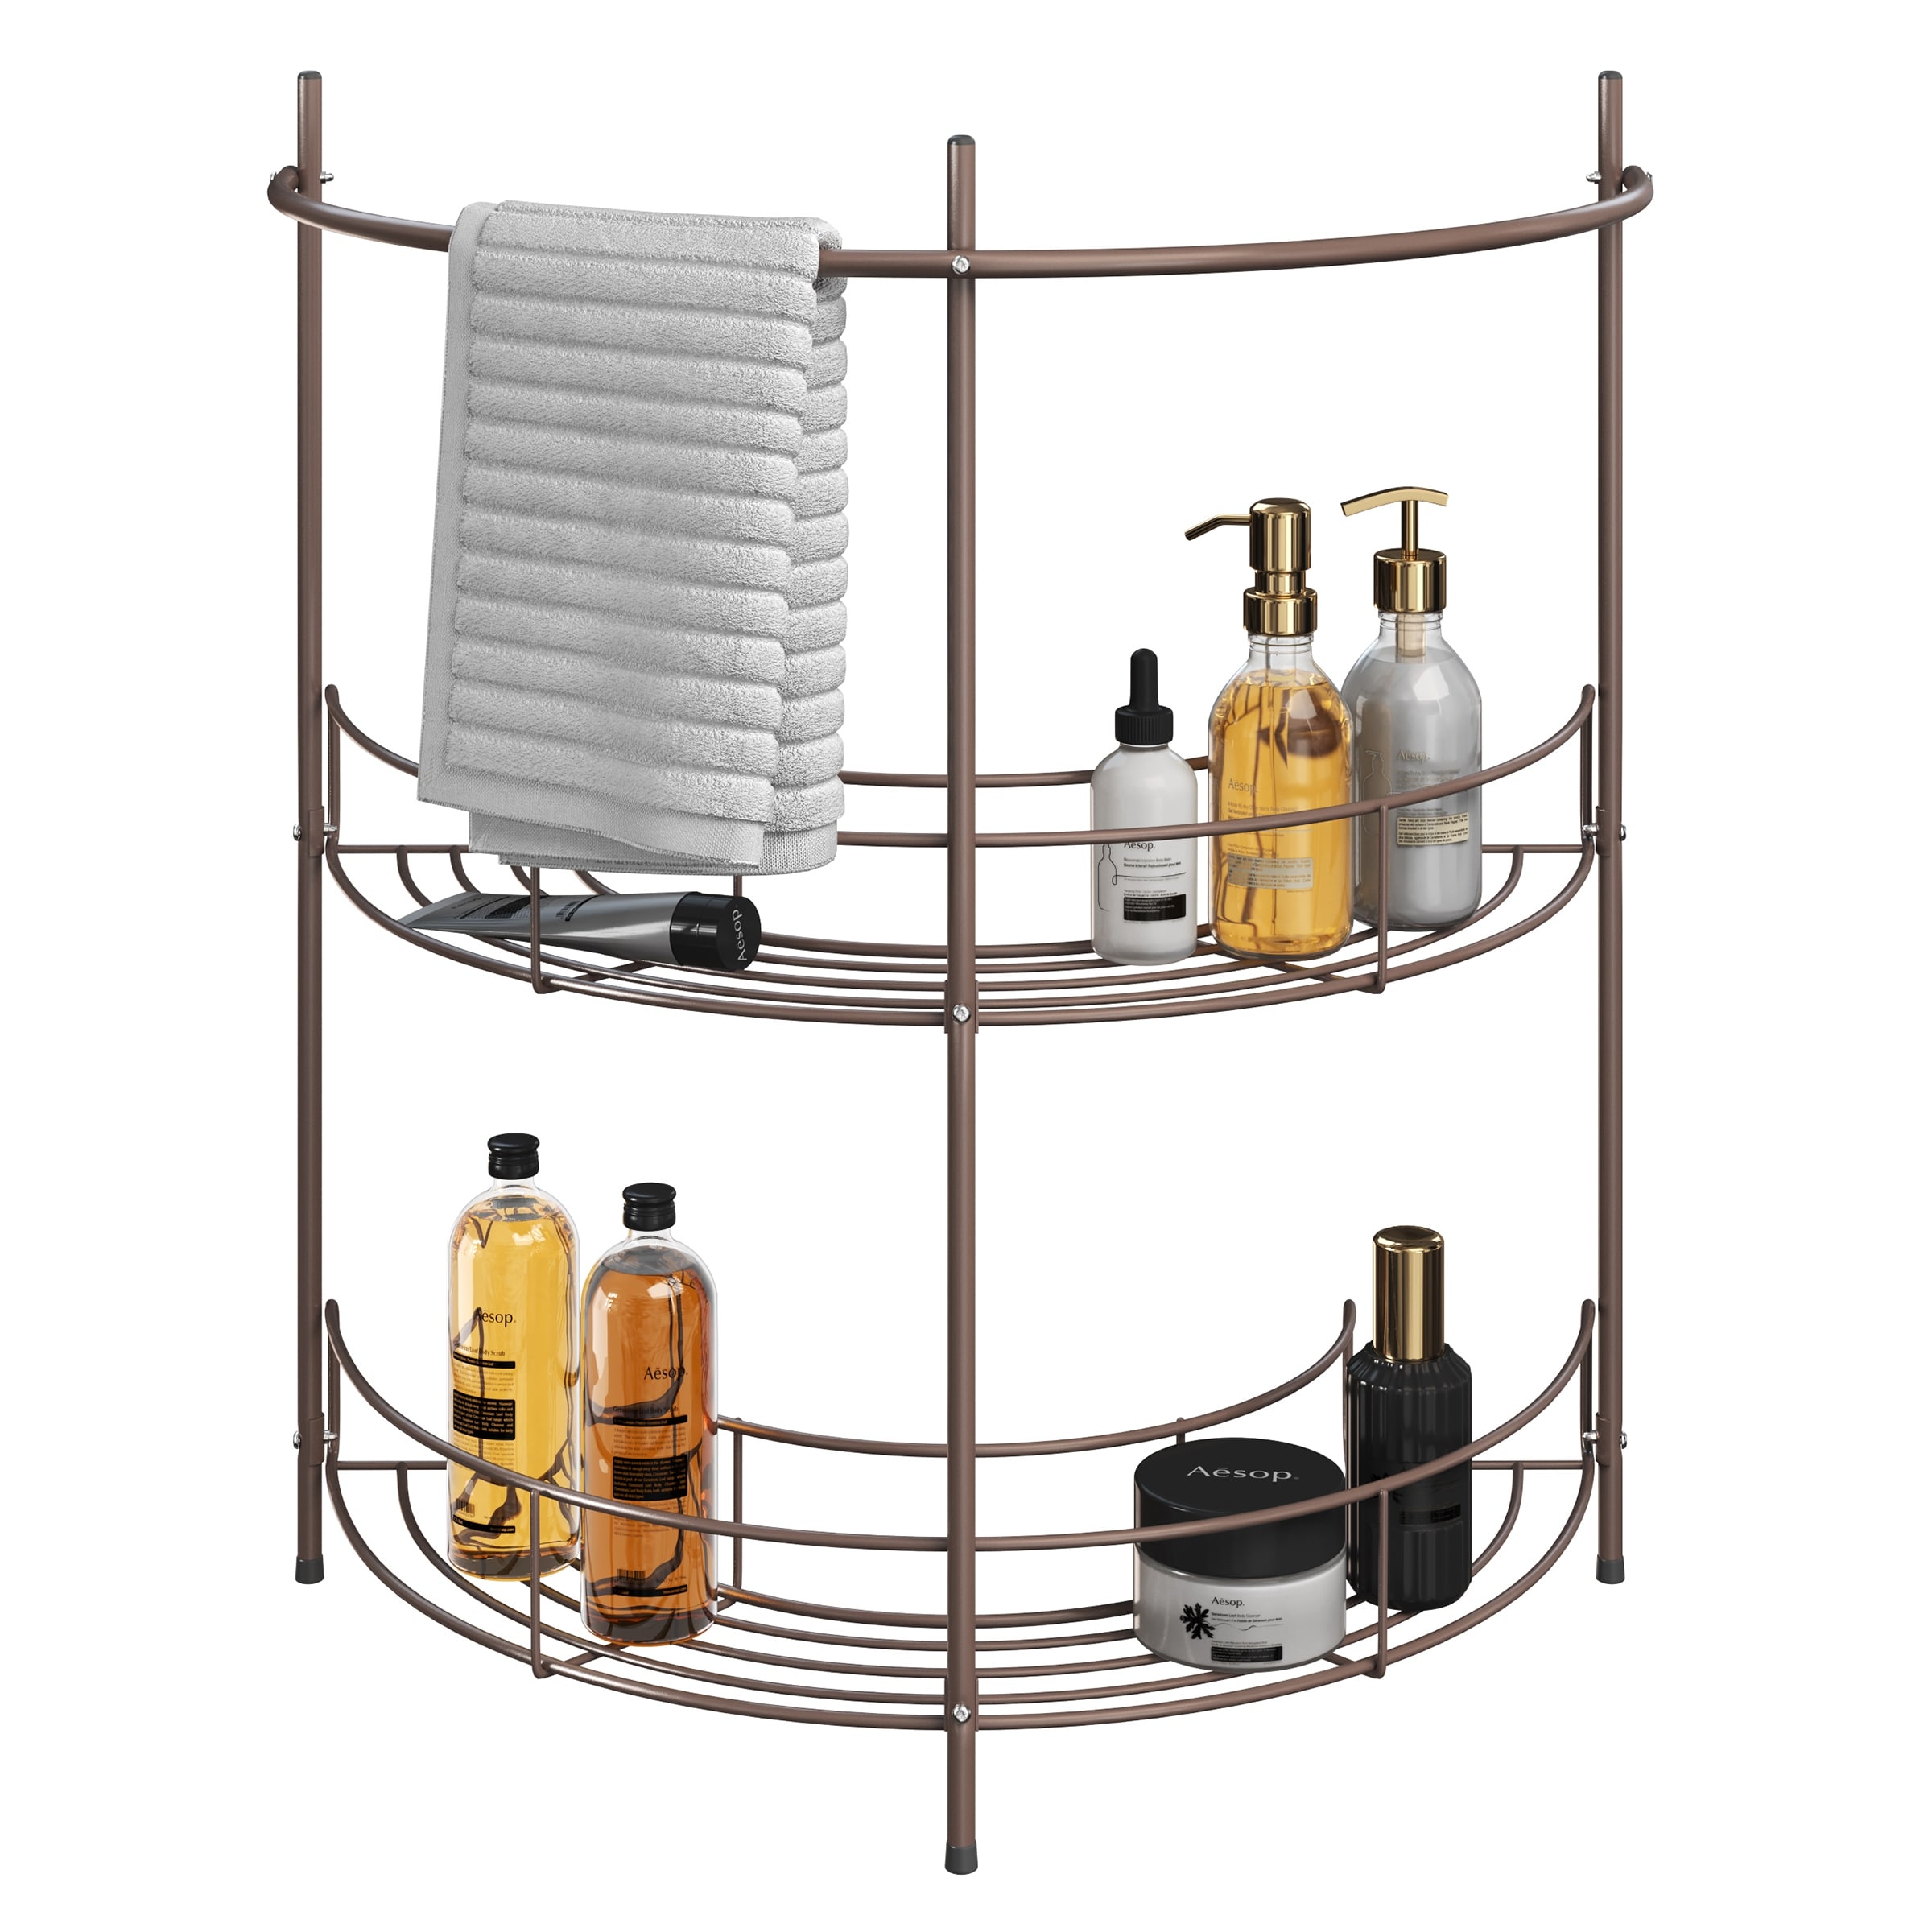 https://ak1.ostkcdn.com/images/products/is/images/direct/a7bf9f6697ea639614f3b5c8c2fe57246bfb6740/Pedestal-Sink-Organizer---Compact-Under-Sink-Rack-with-2-Storage-Shelves-and-Towel-Holder-by-Lavish-Home.jpg